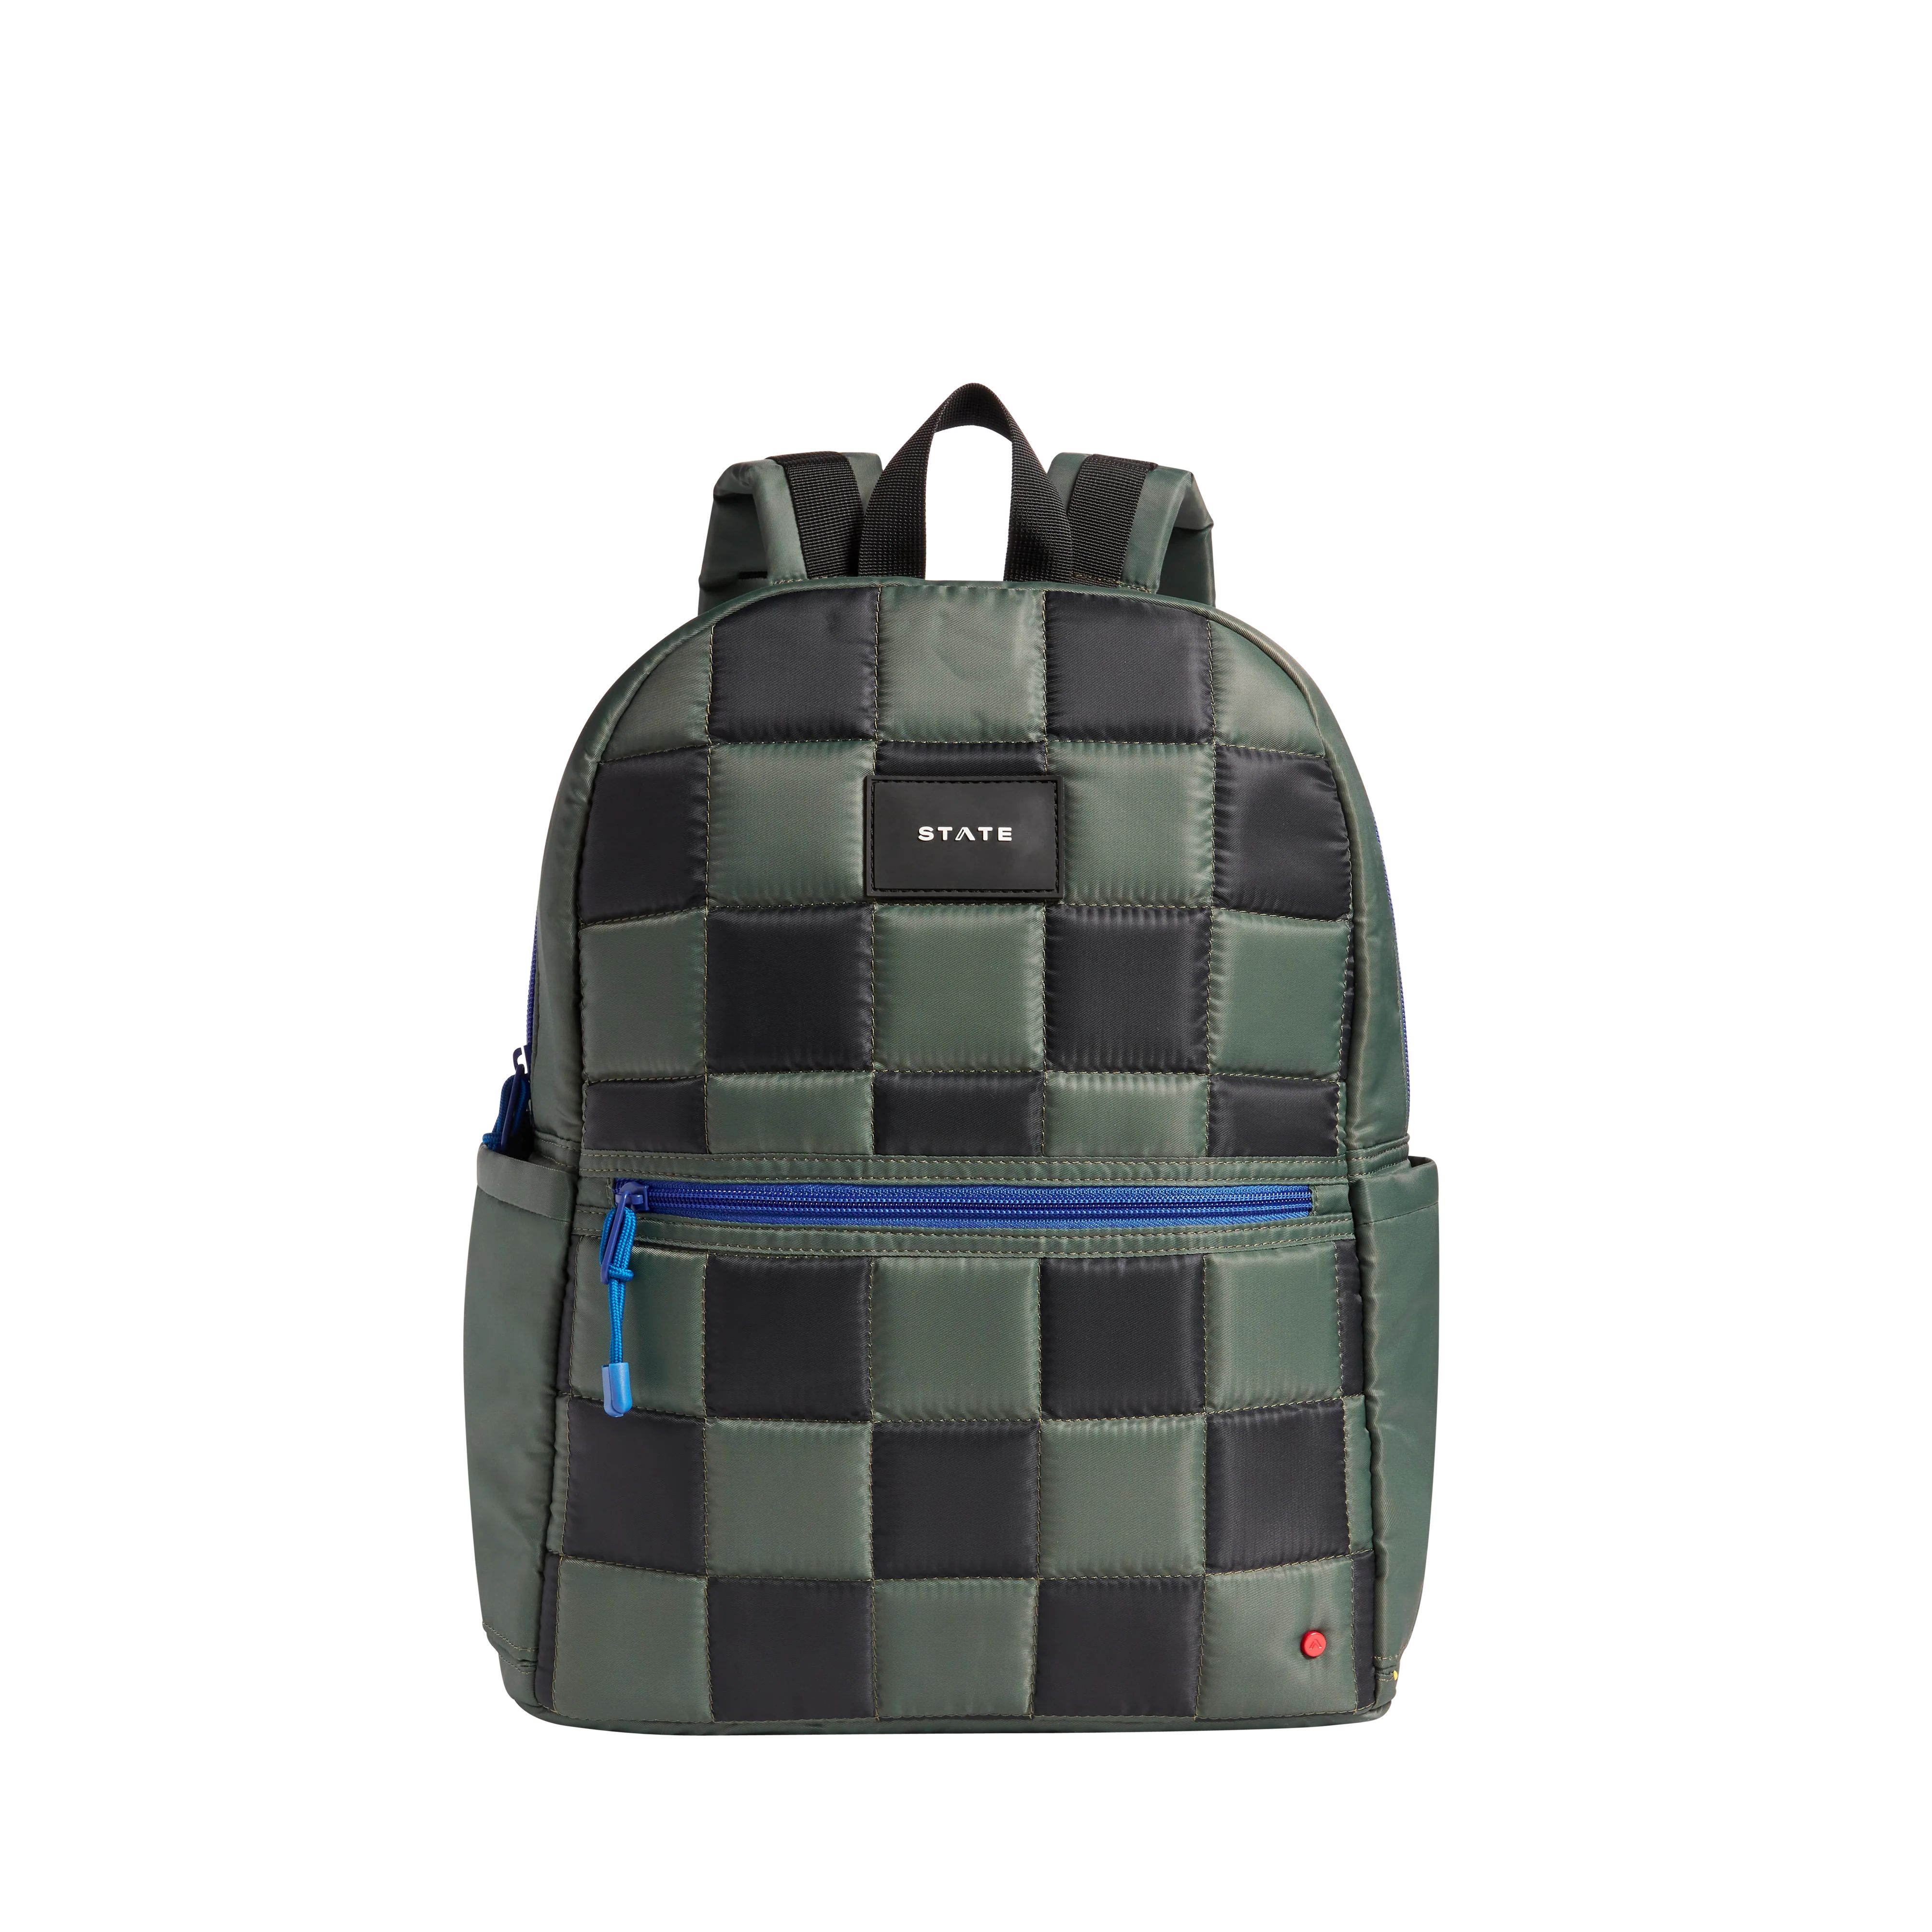 STATE Bags | Kane Kids Double Pocket Backpack Nylon Puffer Checkerboard | STATE Bags